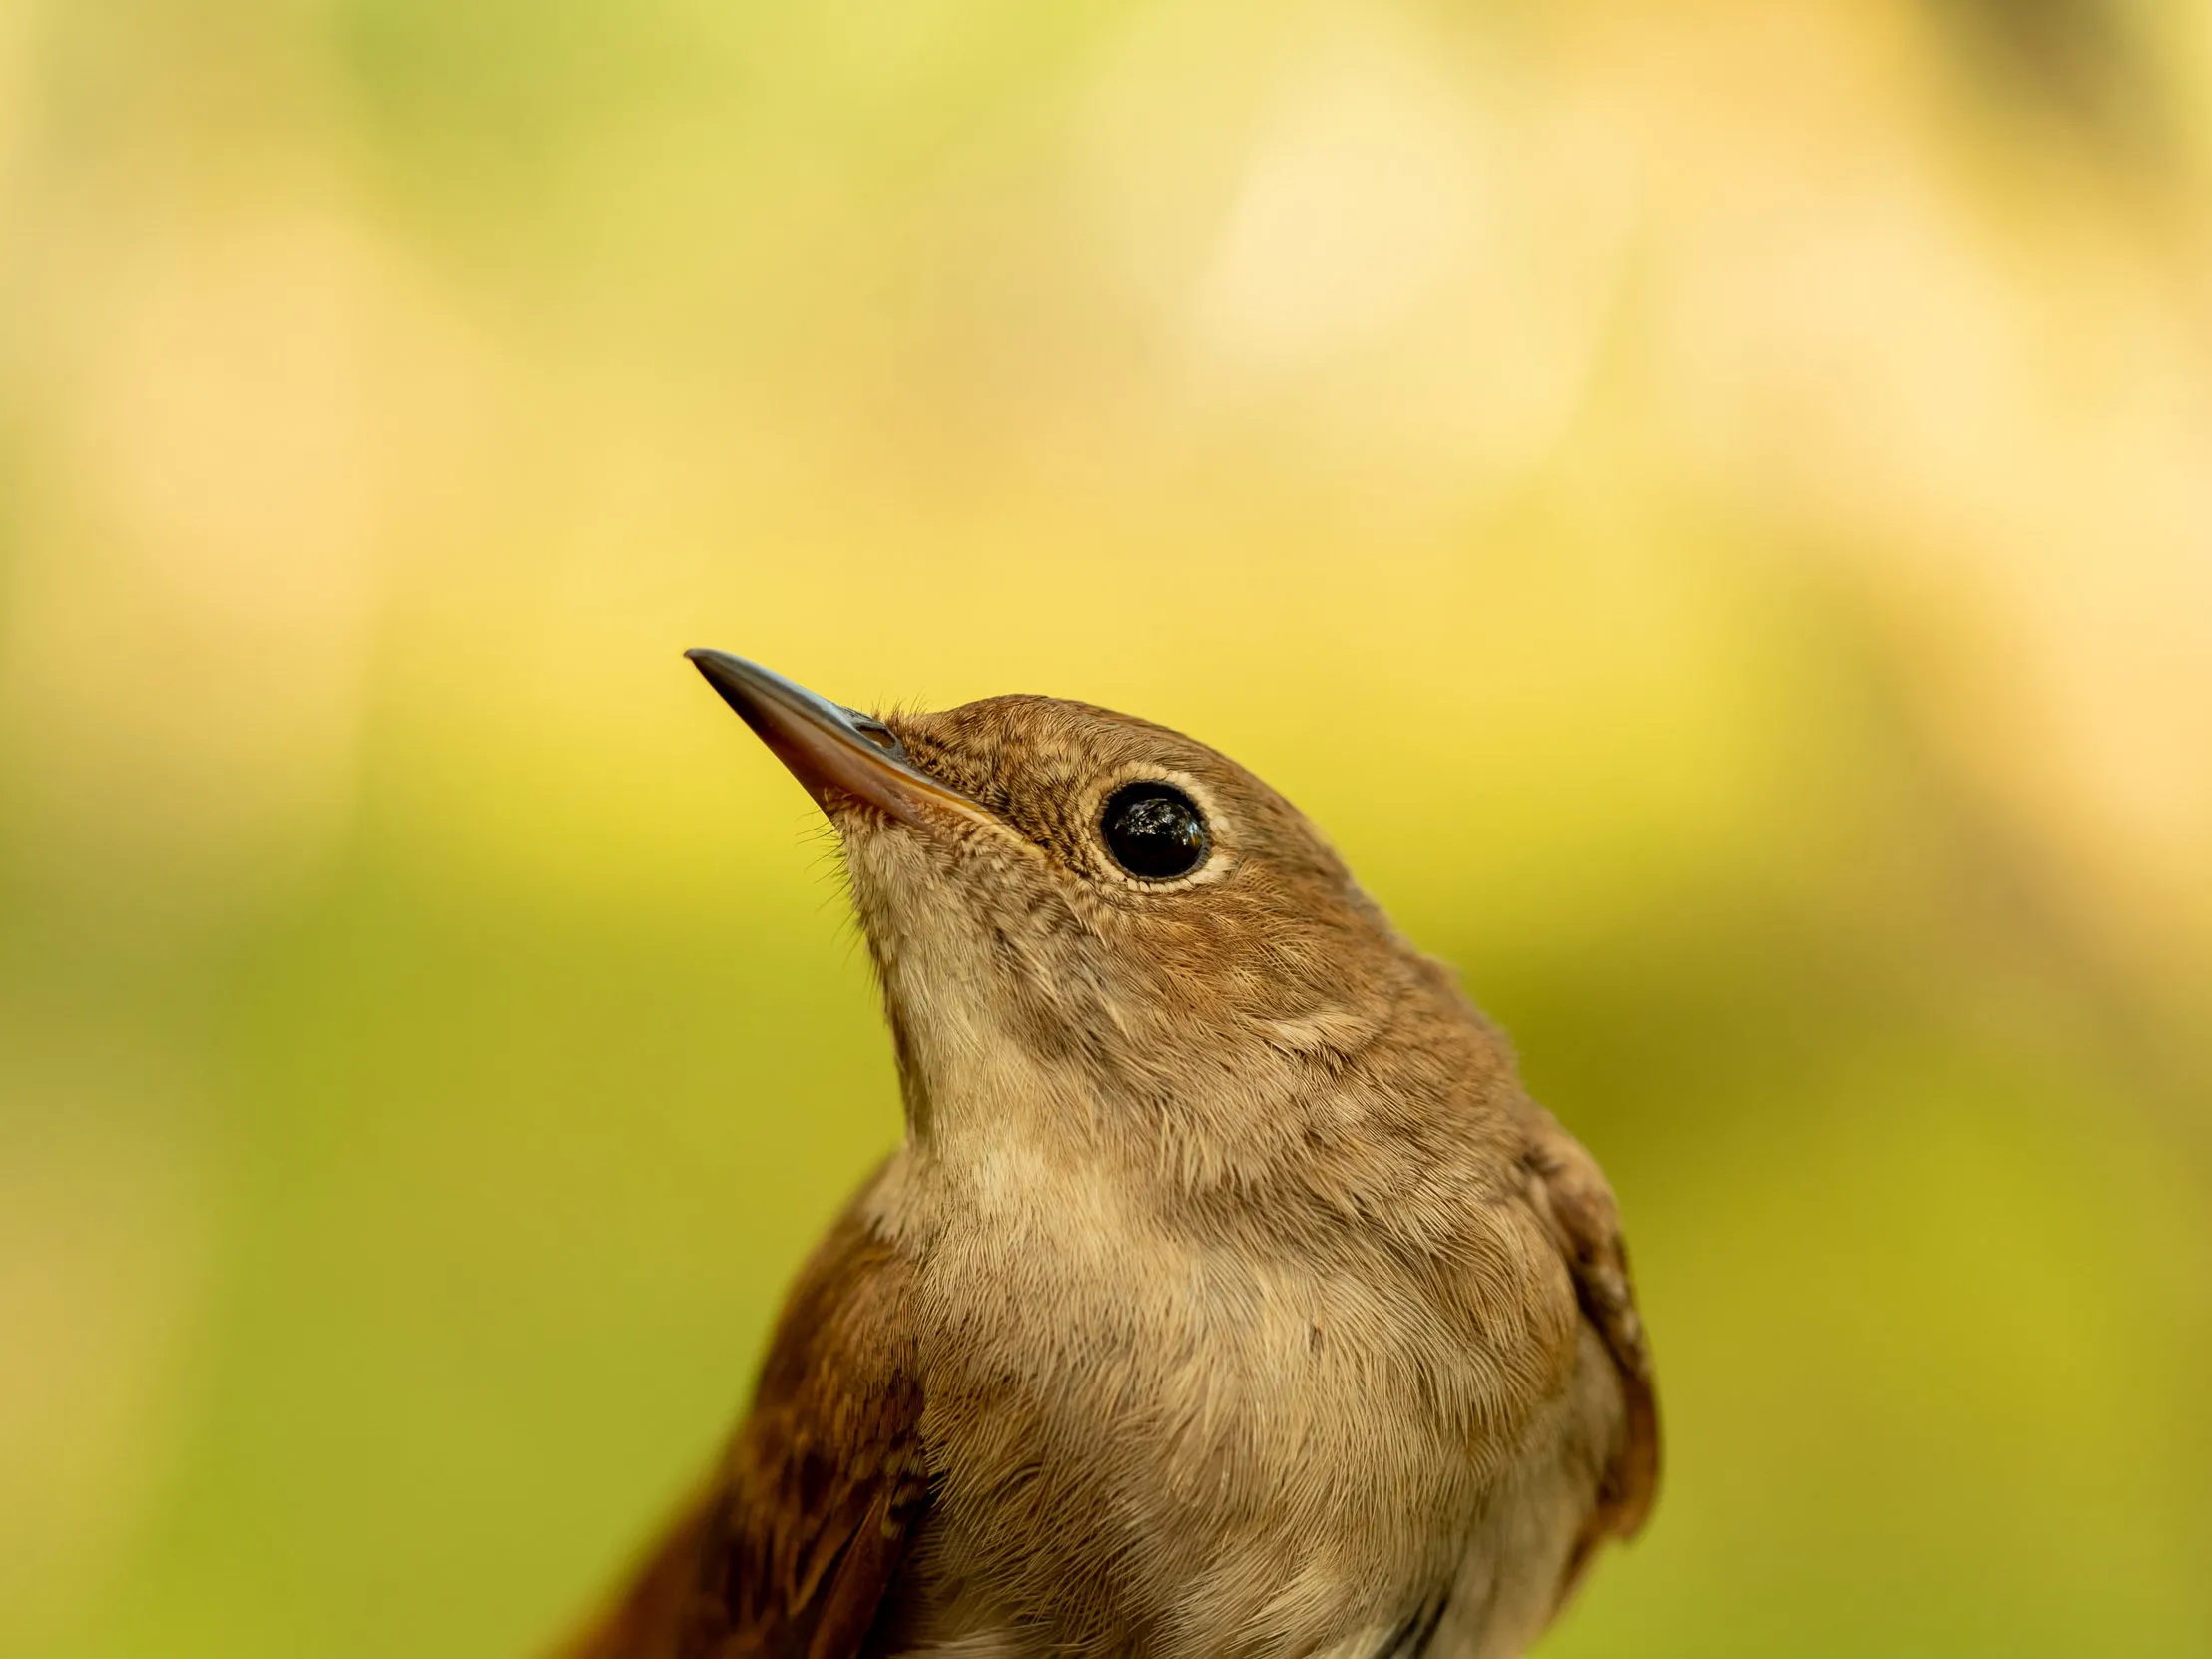 A close up of a Nightingale looking up toward the sky, against a bring green background.